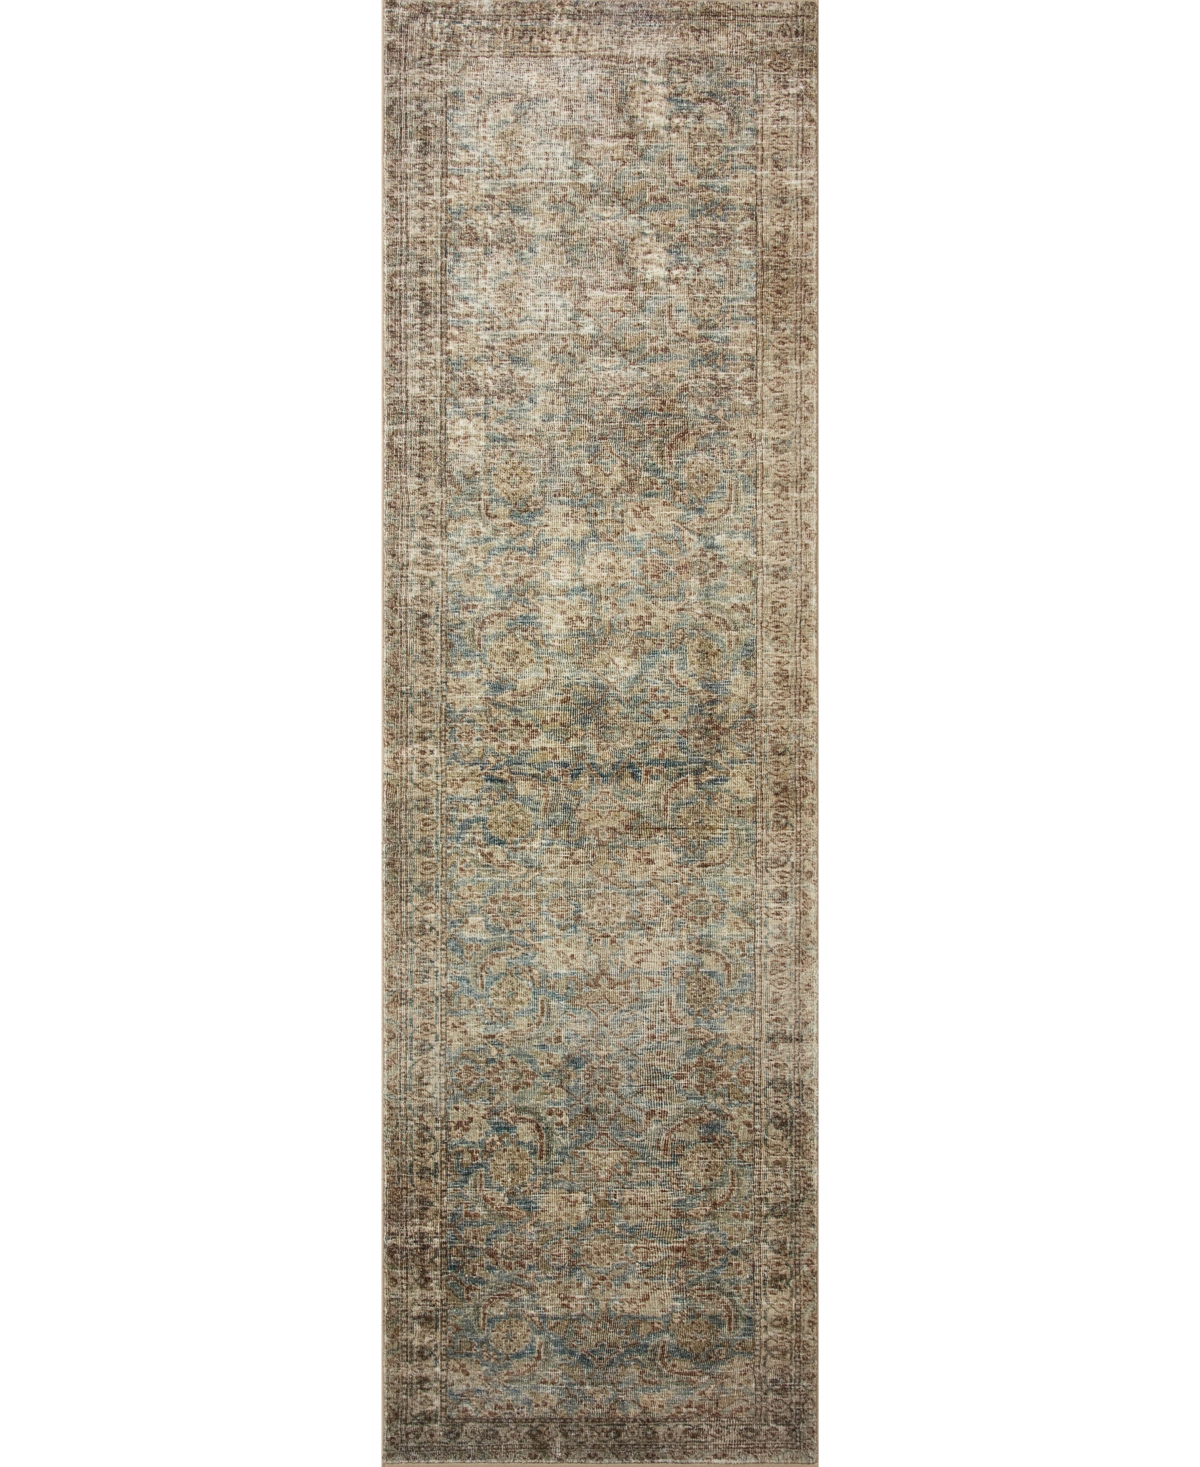 Amber Lewis X Loloi Morgan Mog-04 2'3" X 11'6" Runner Area Rug In Turquoise